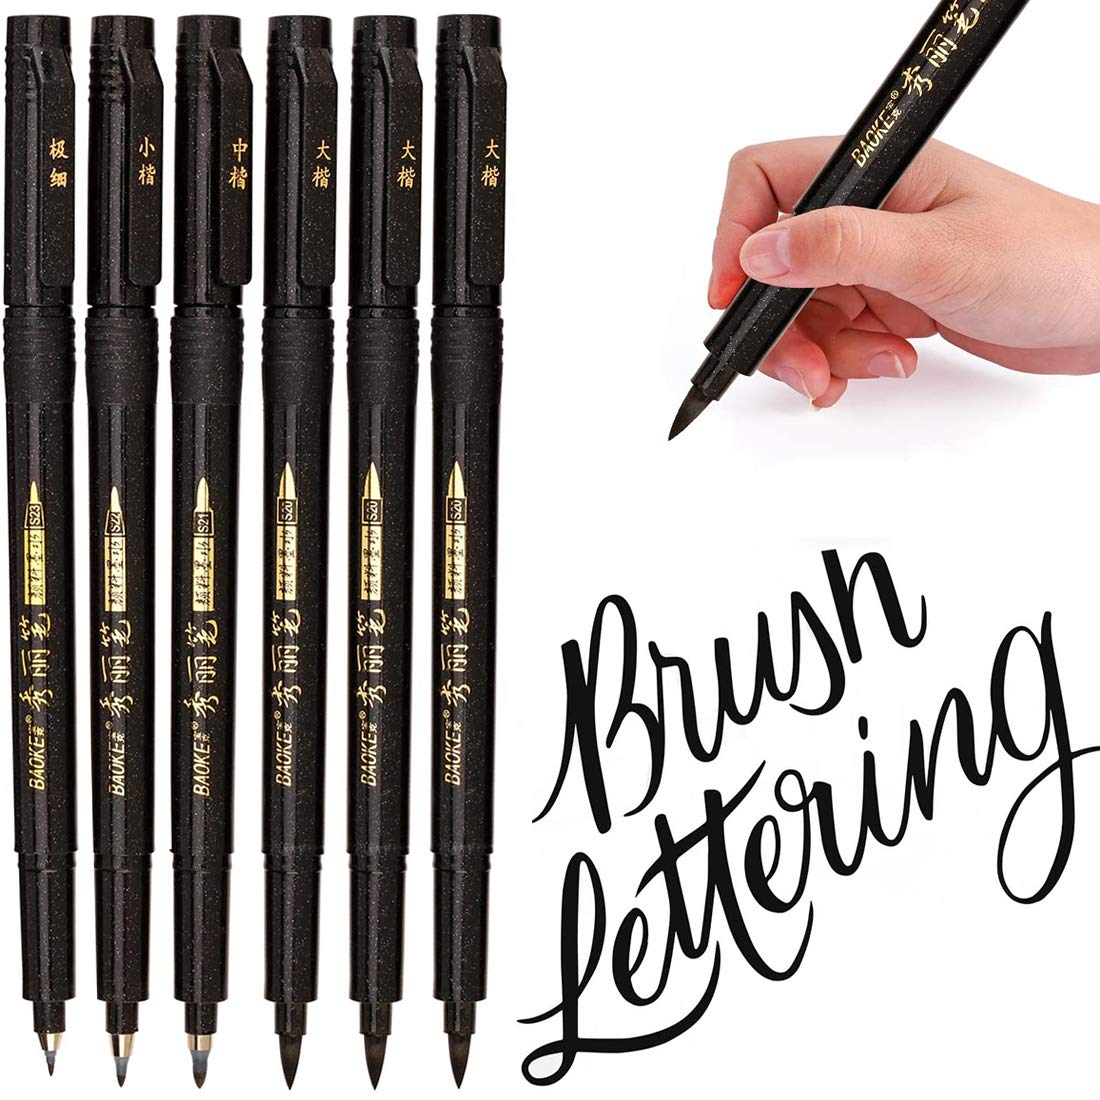 Casewin Hand Lettering Pens, Calligraphy Pens, Brush Markers Set, Soft and  Hard Tip, Black Ink Refillable - 4 Size for Beginners Writing, Art